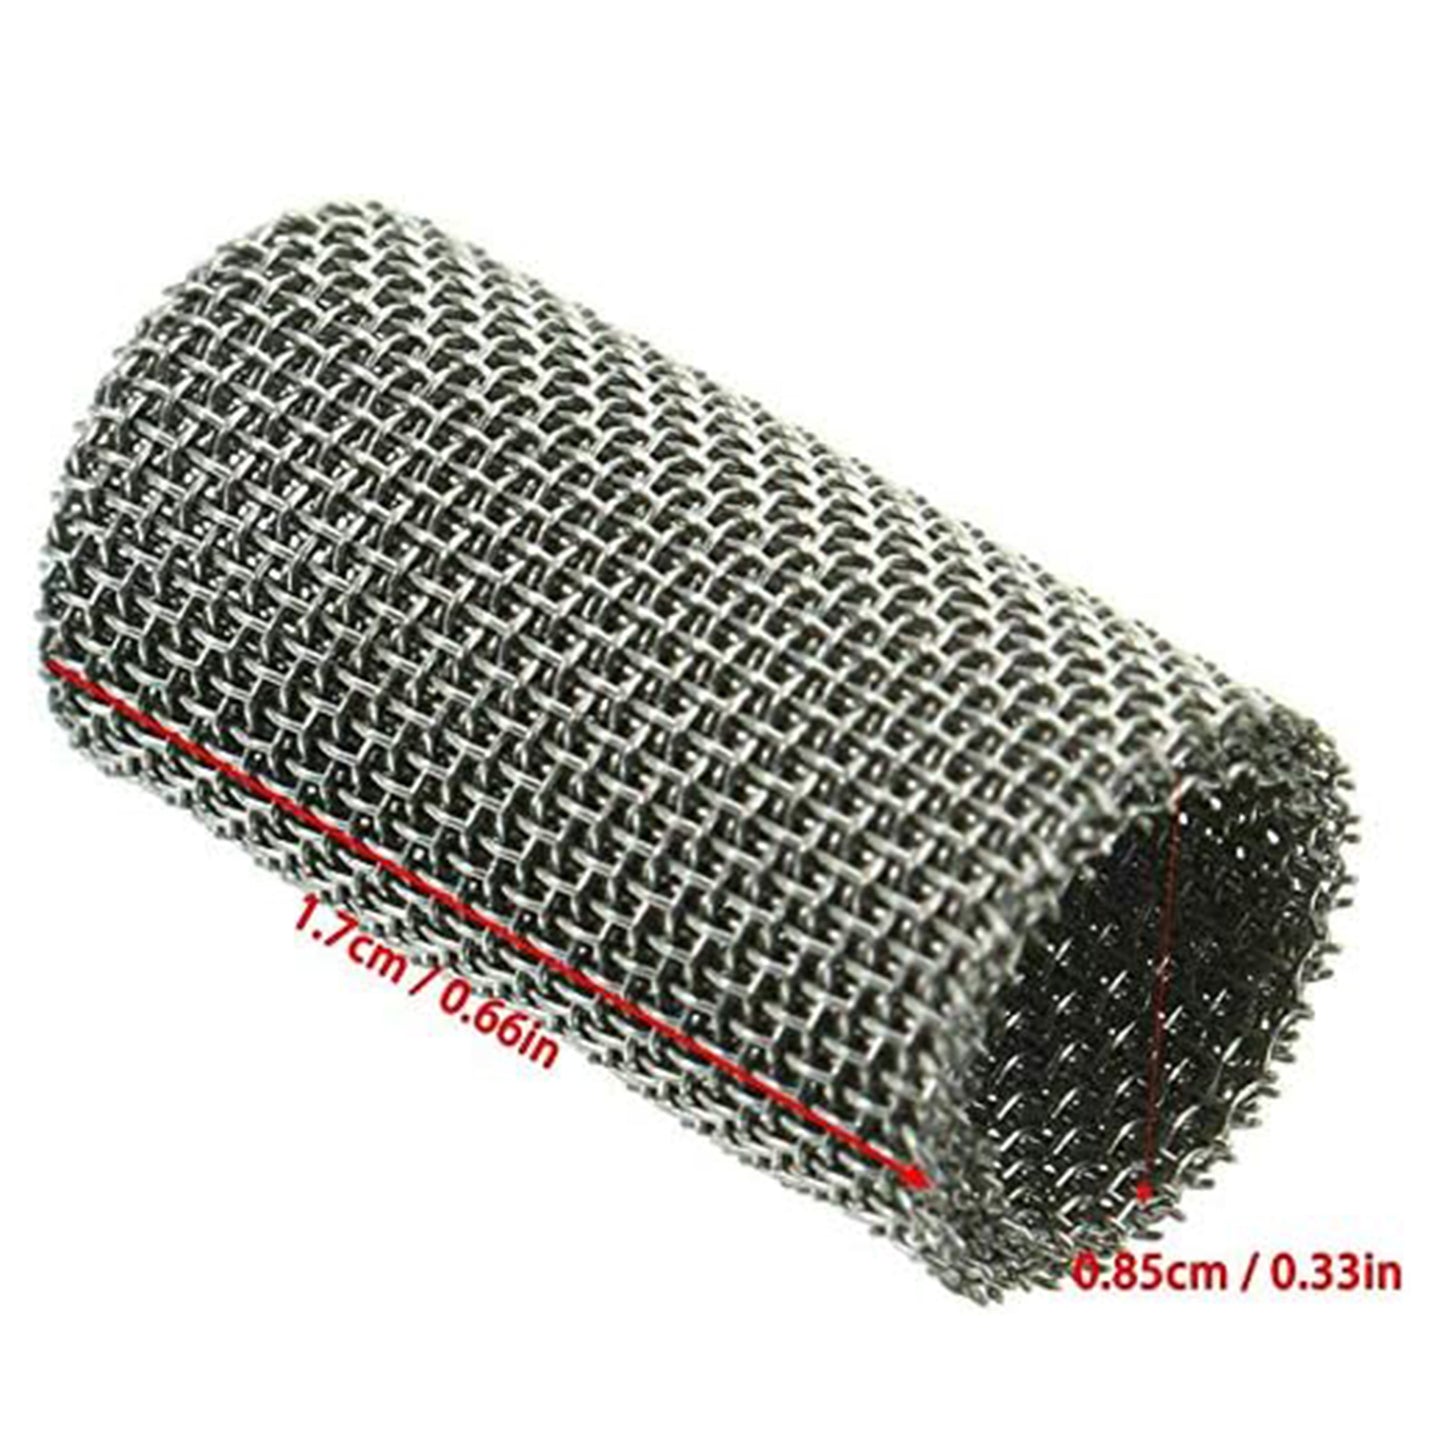 10X 252069100102 Heater Glow Plug Strainer Screen Compatible with Eberspacher Heater Airtronic D2 D4 D4S